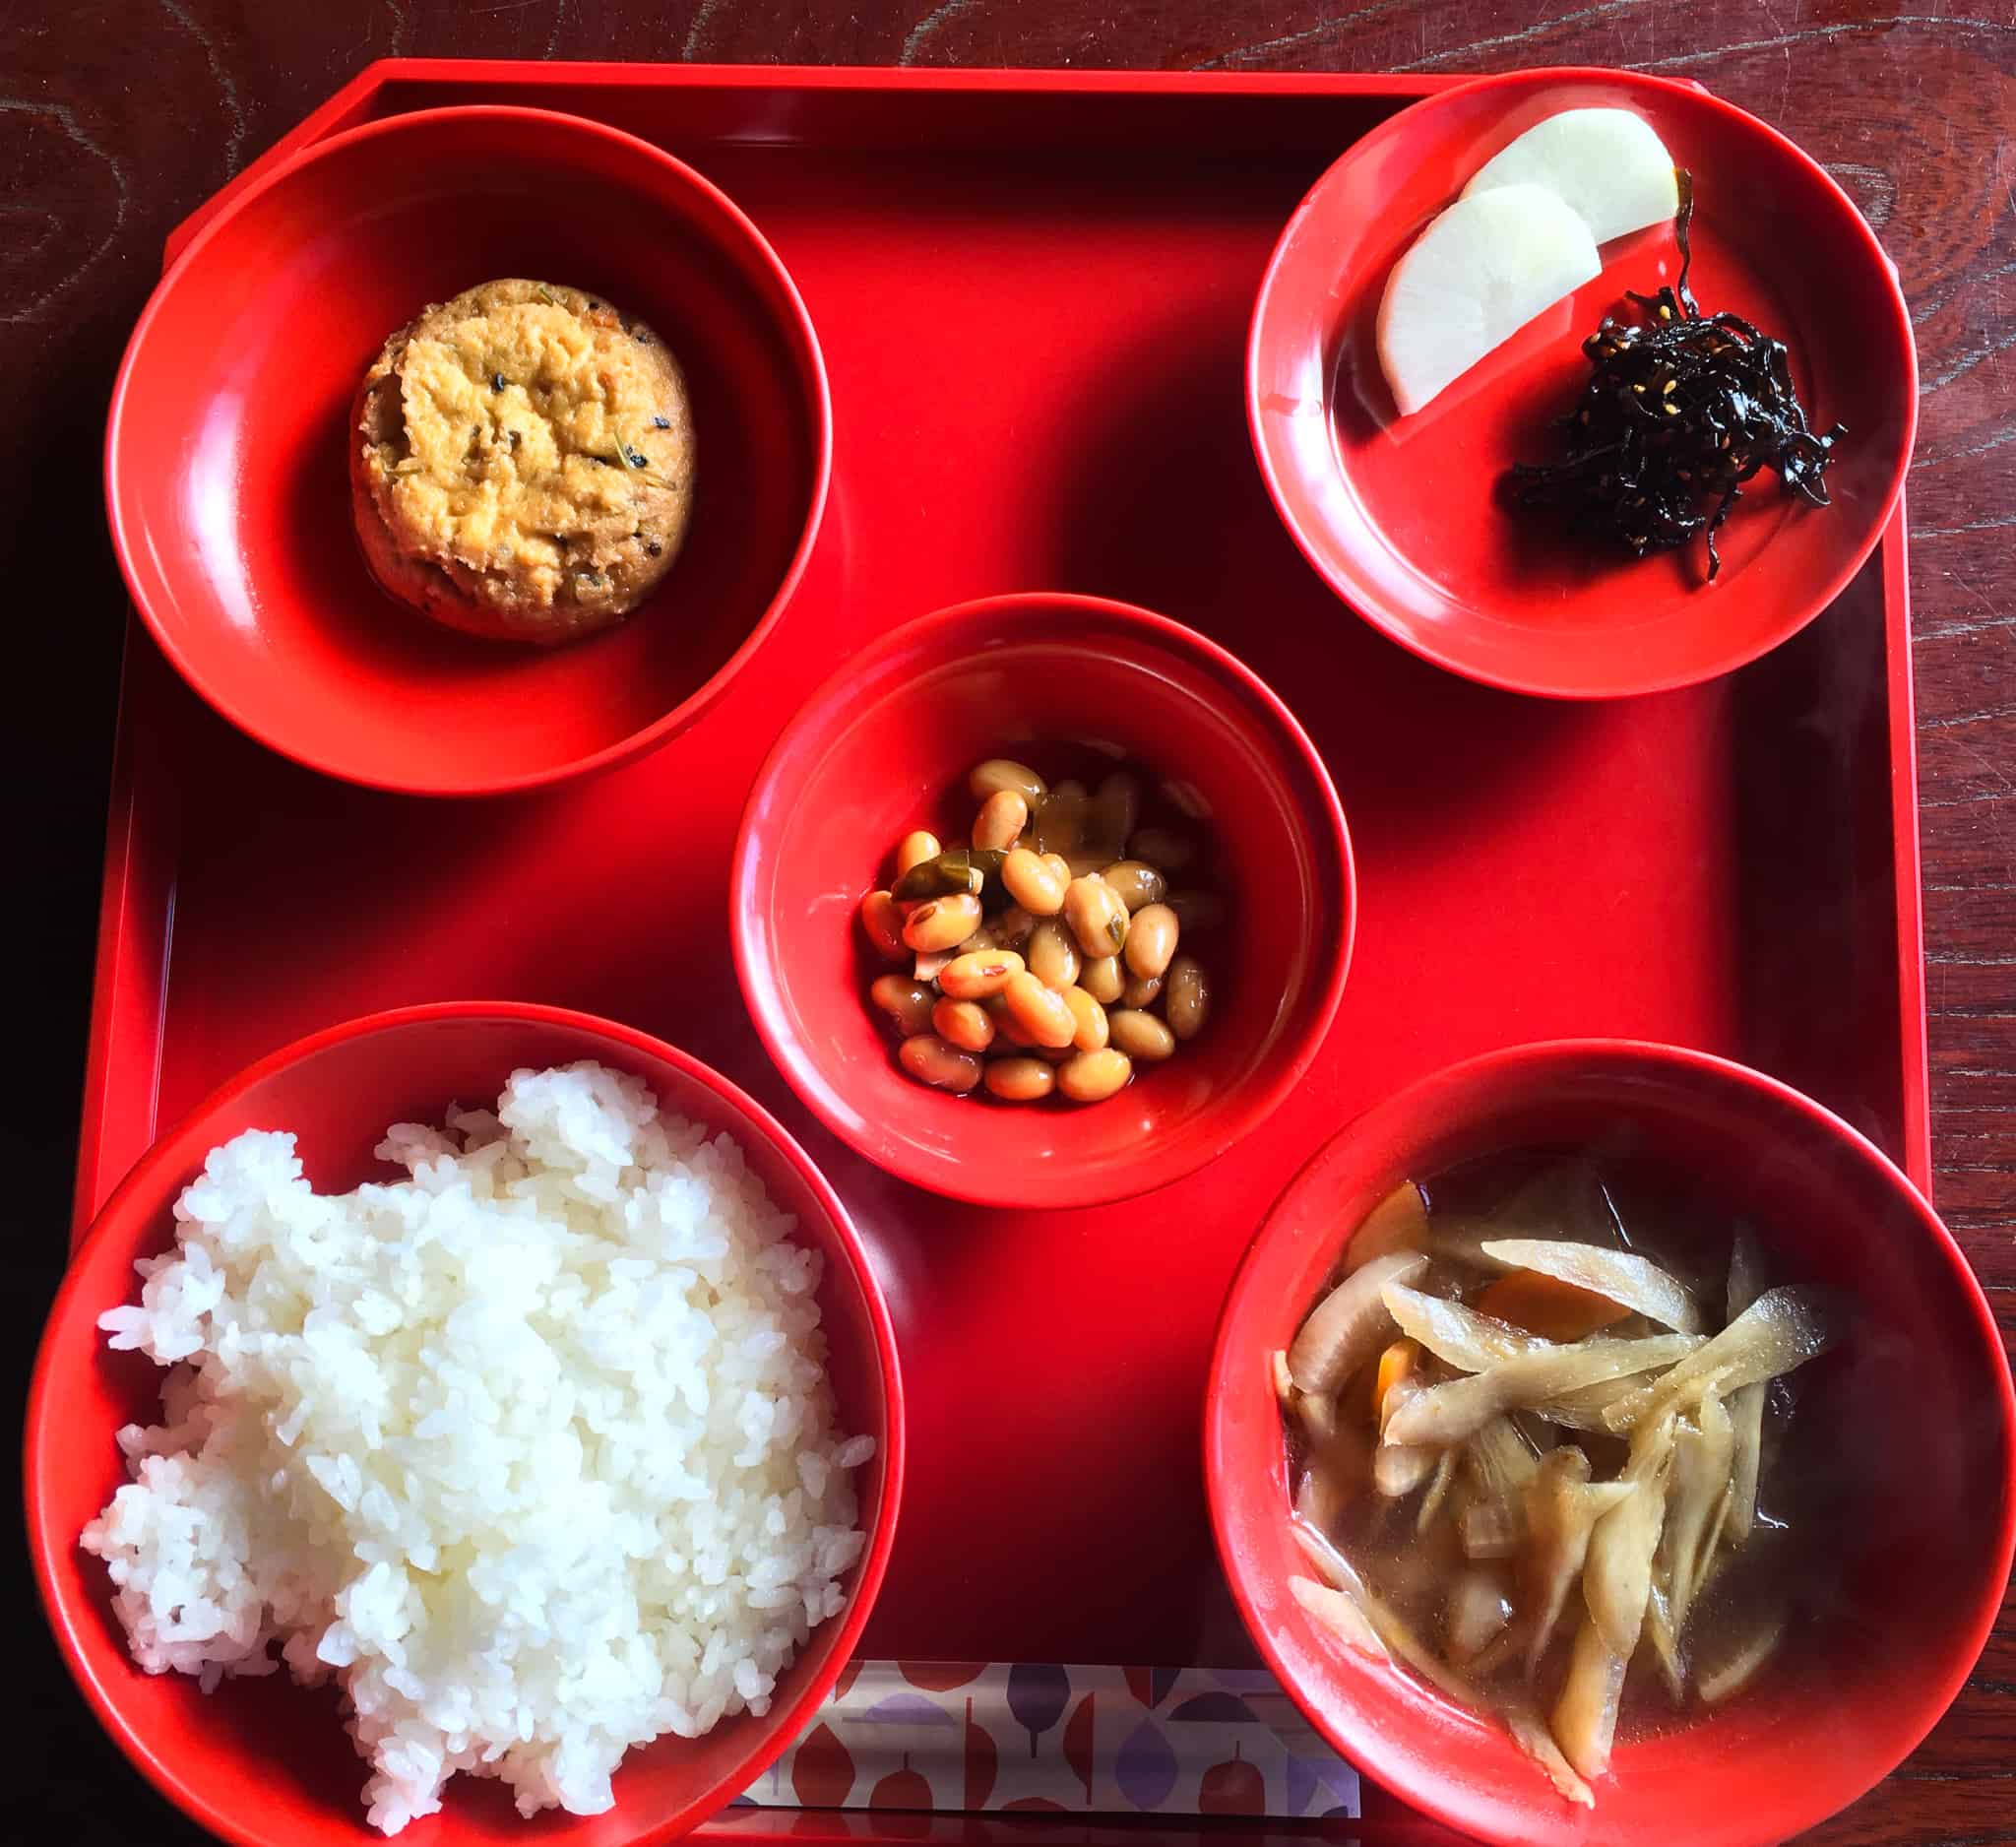 shojin ryori is the style of meal served at every Buddhist temple